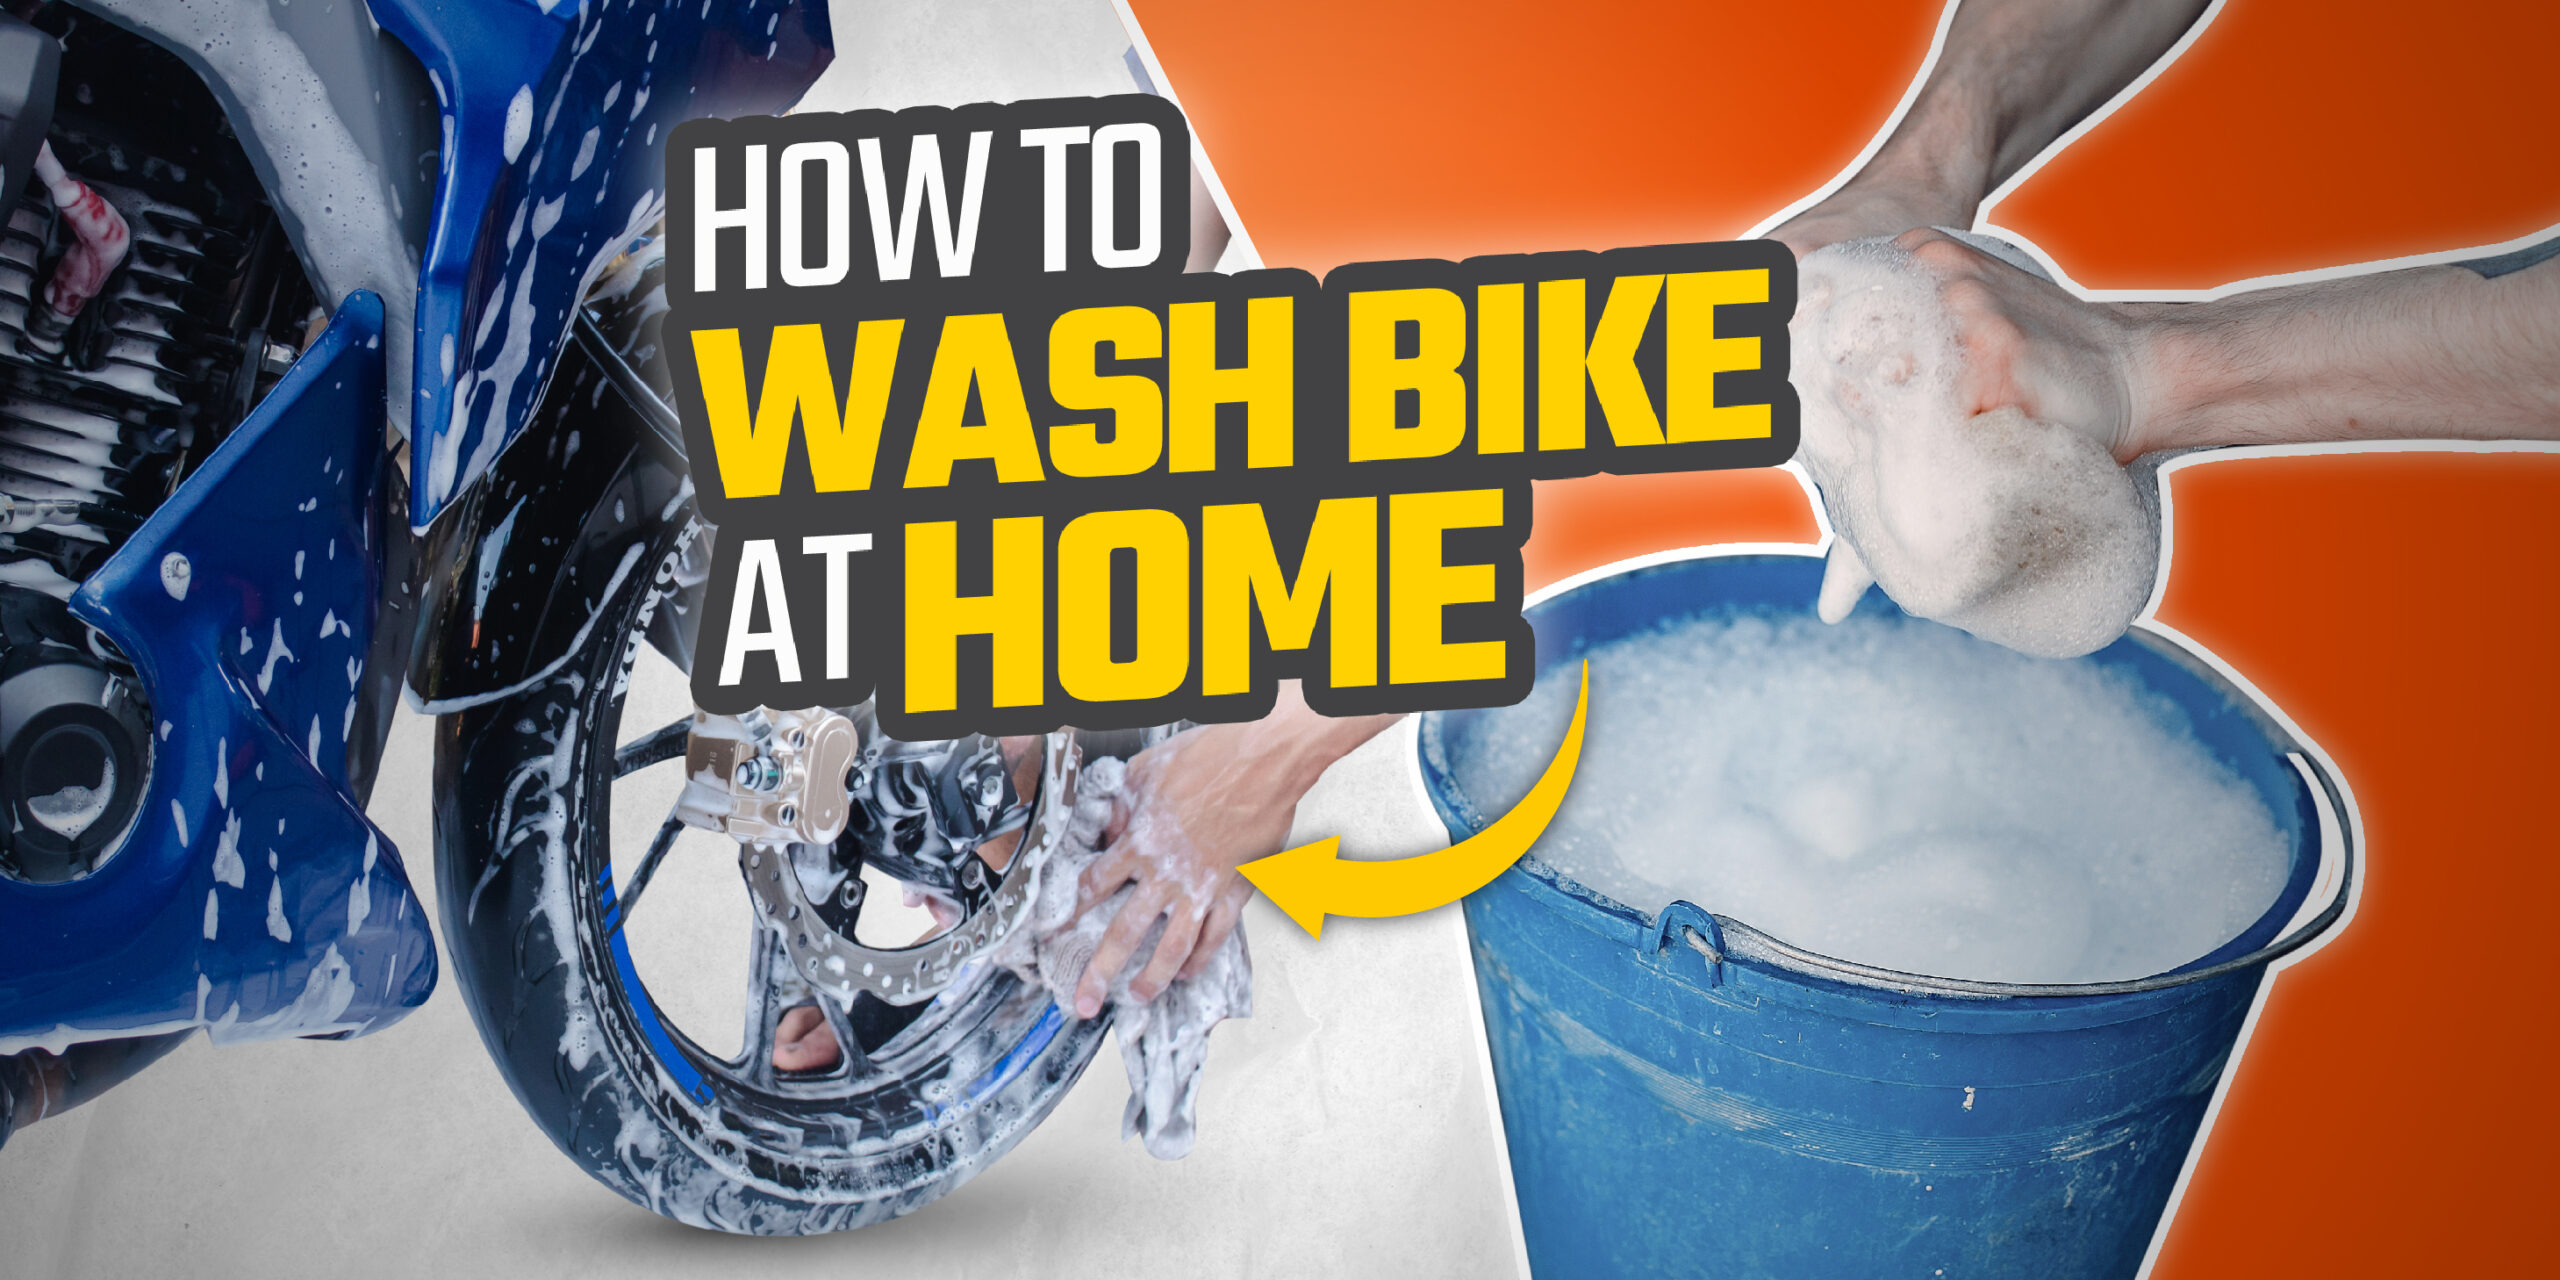 How to Bike wash at home